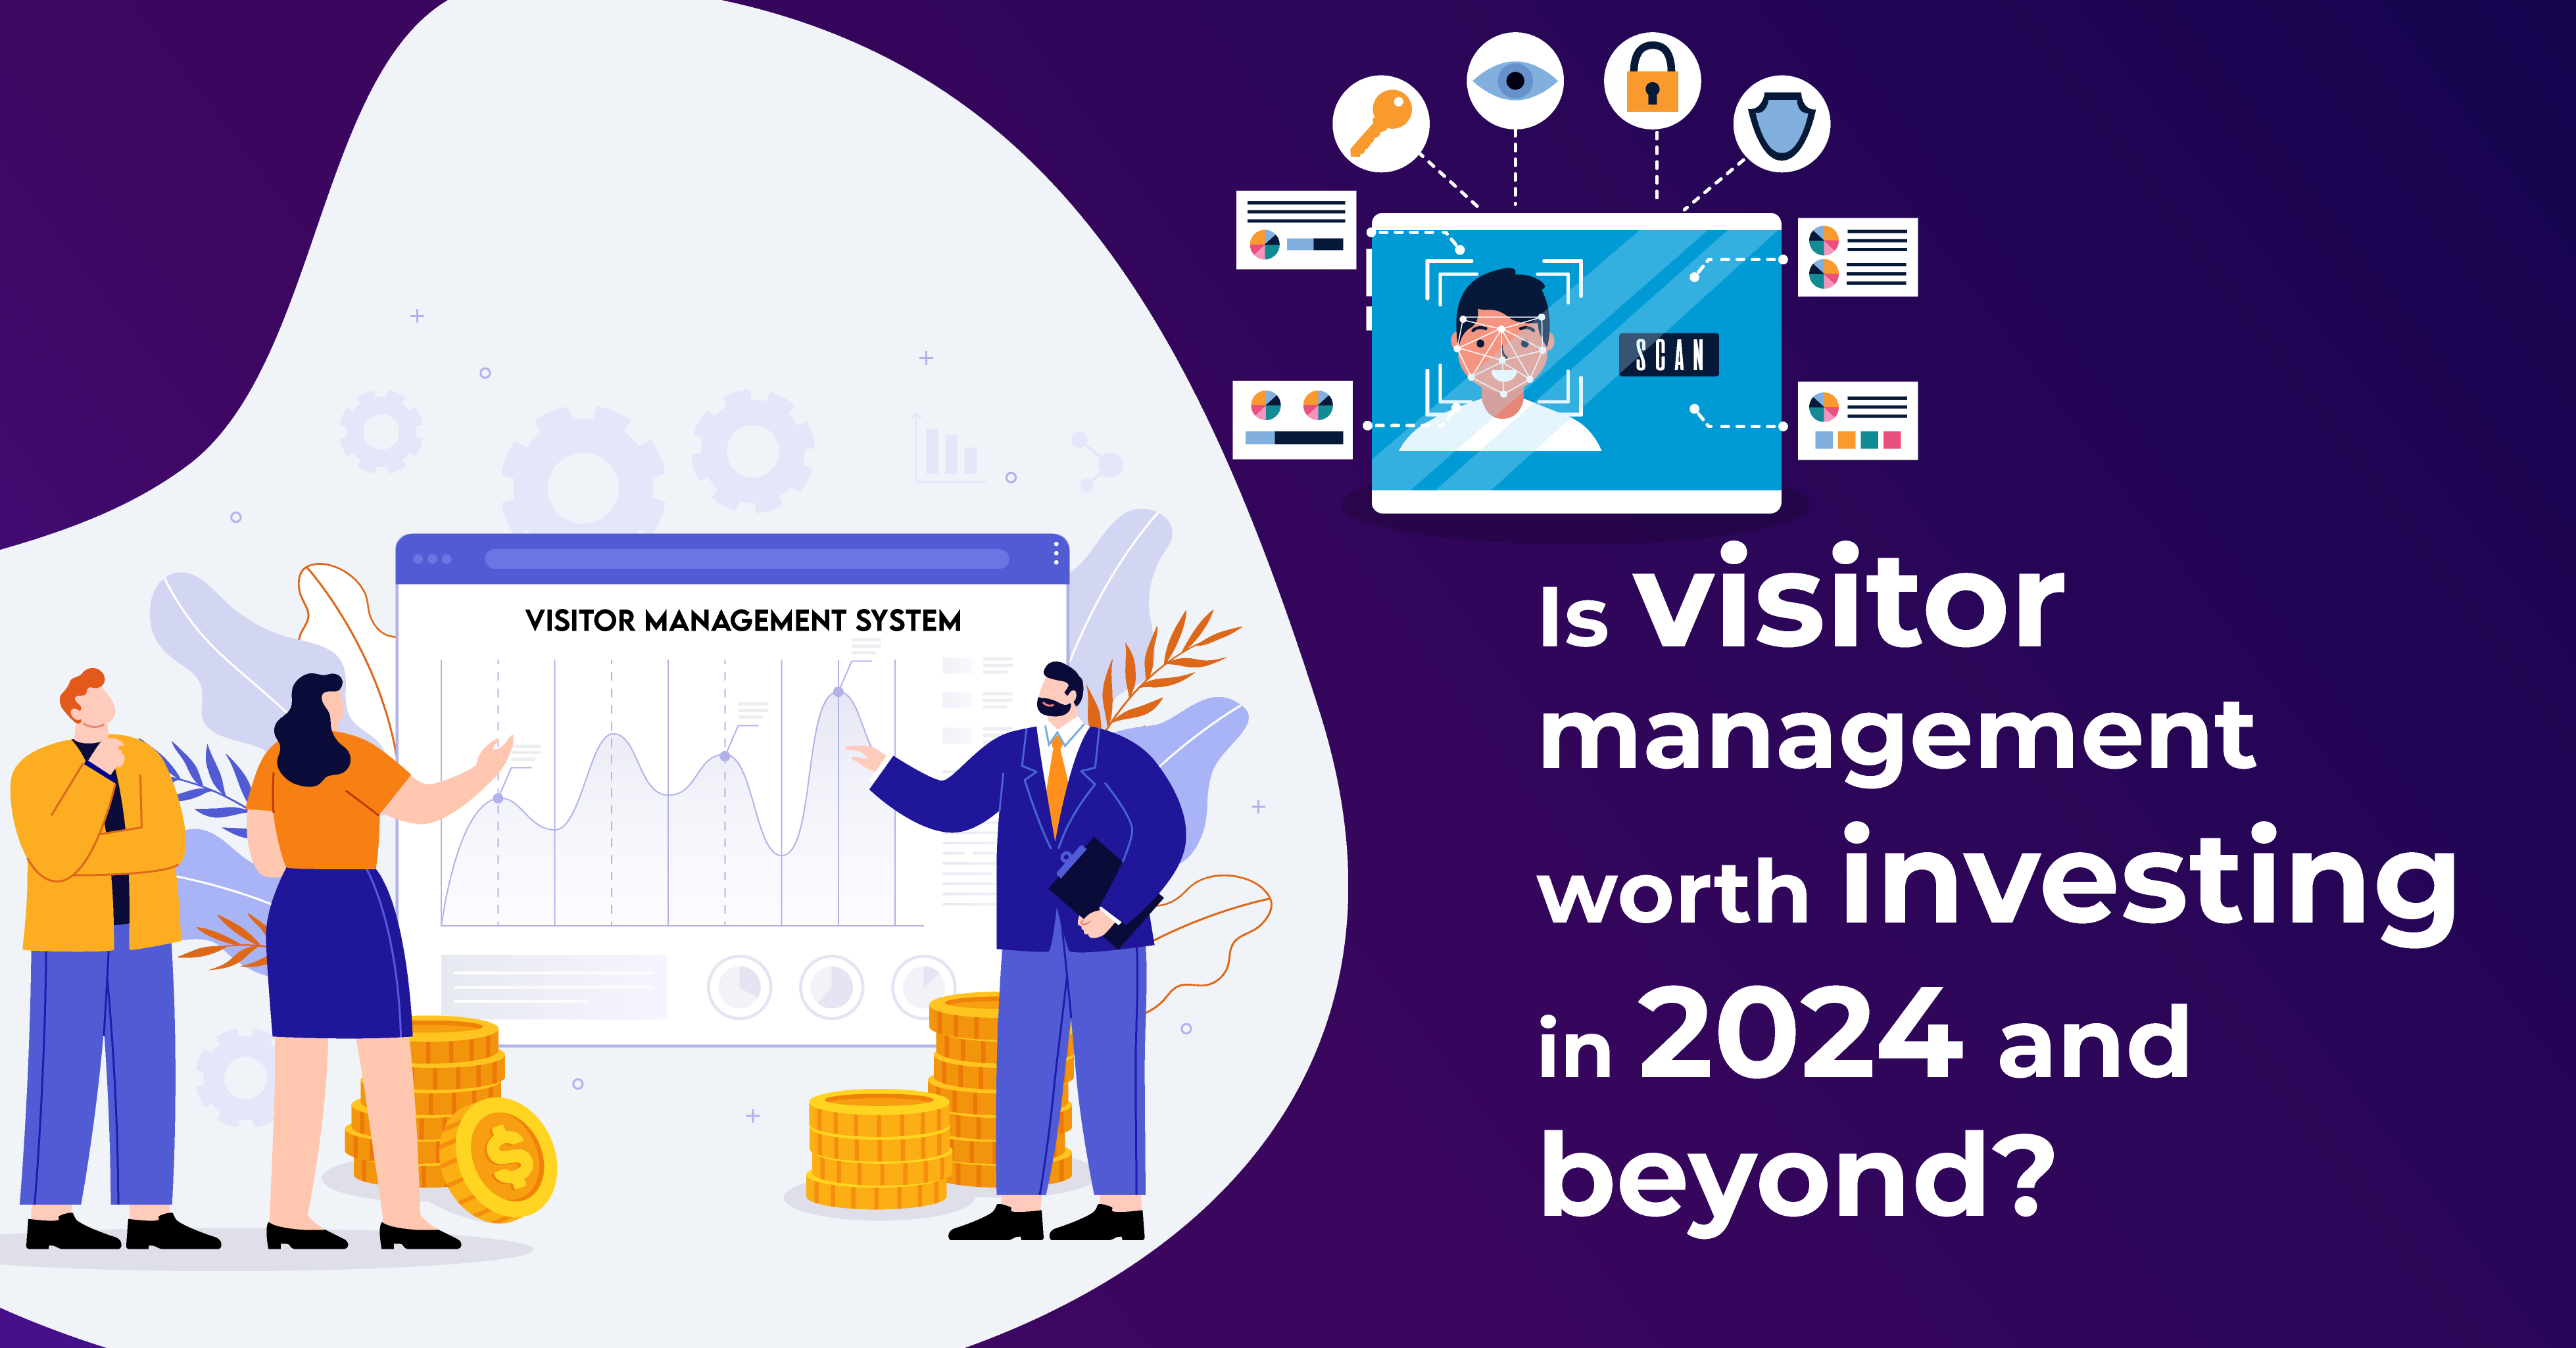 Is visitor management worth investing in 2024 and beyond